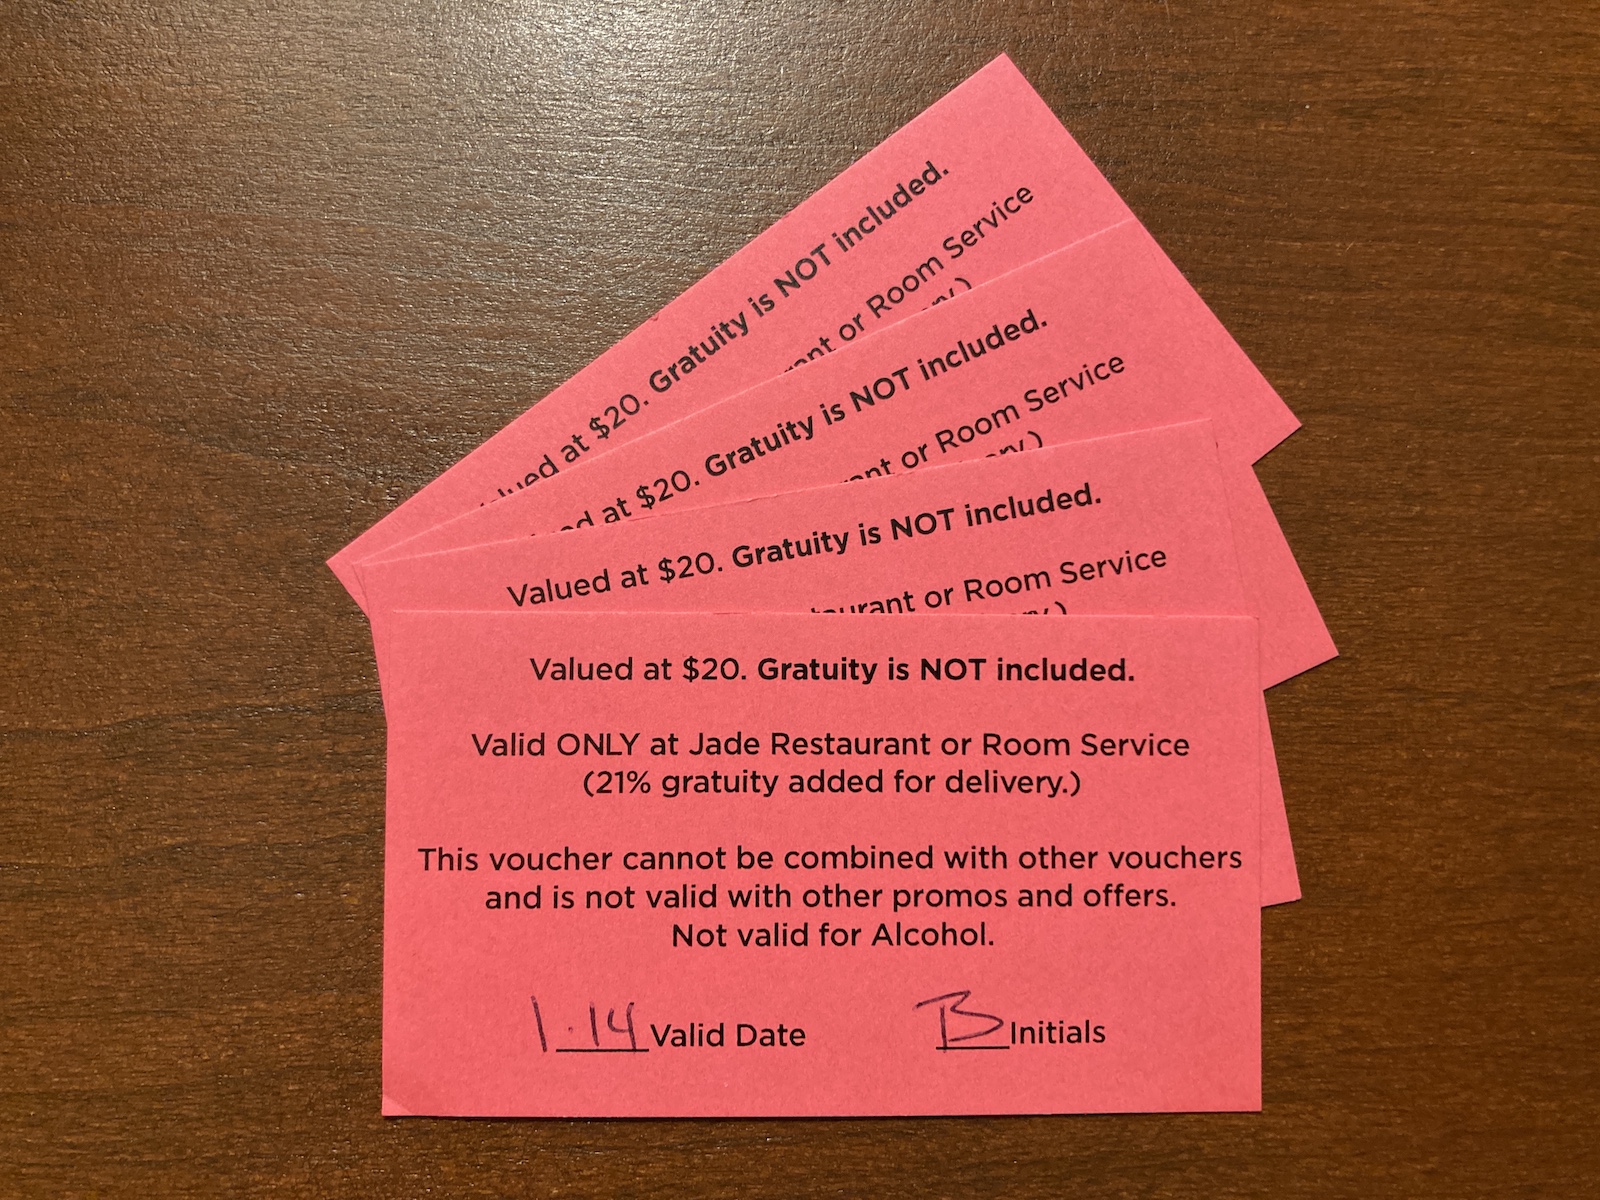 Image of 4 meal vouchers worth $20 each